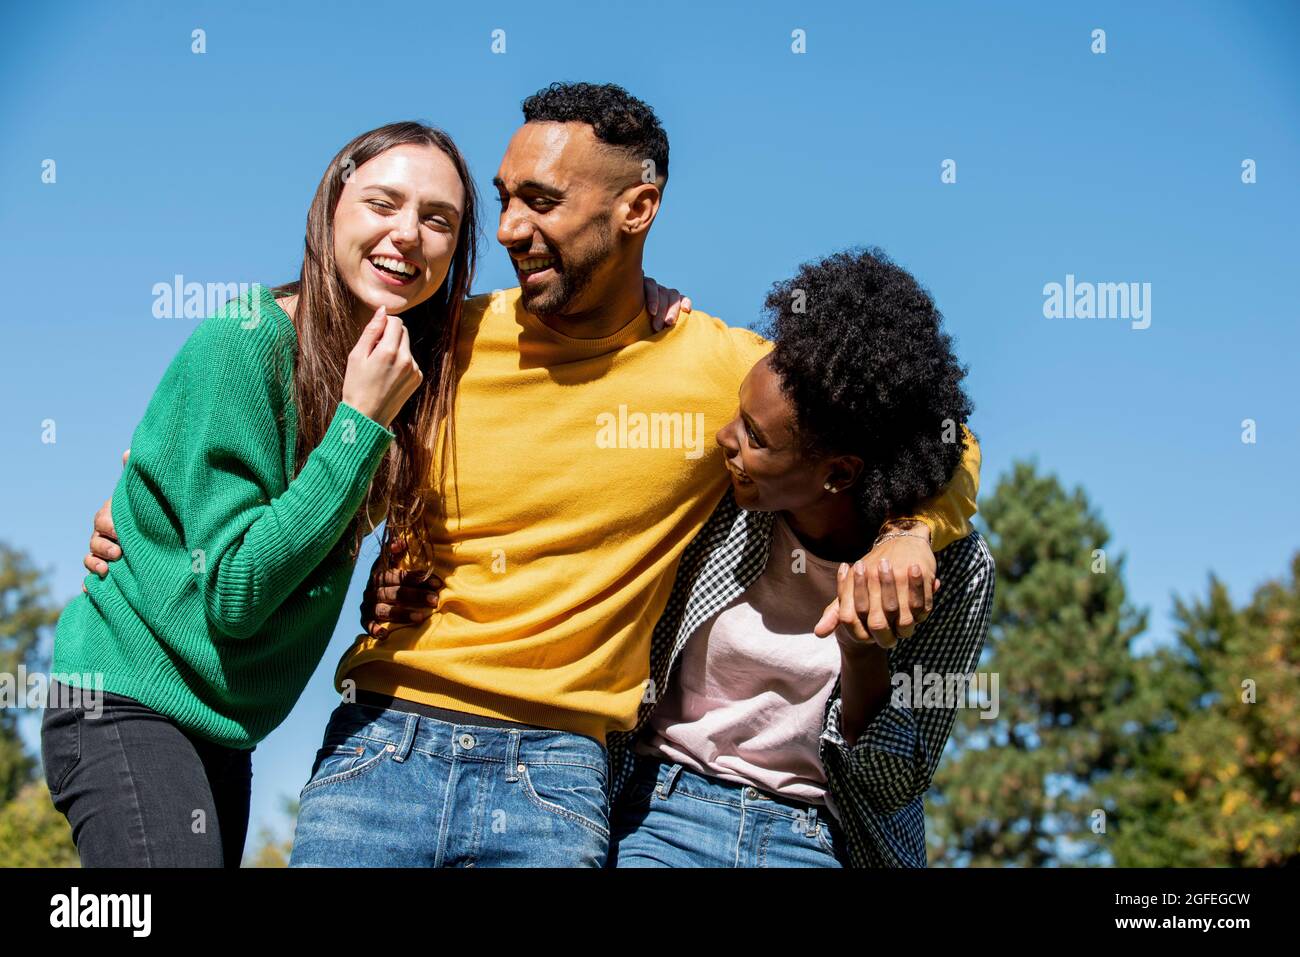 Smiling young friends standing with arm around in public park Stock Photo